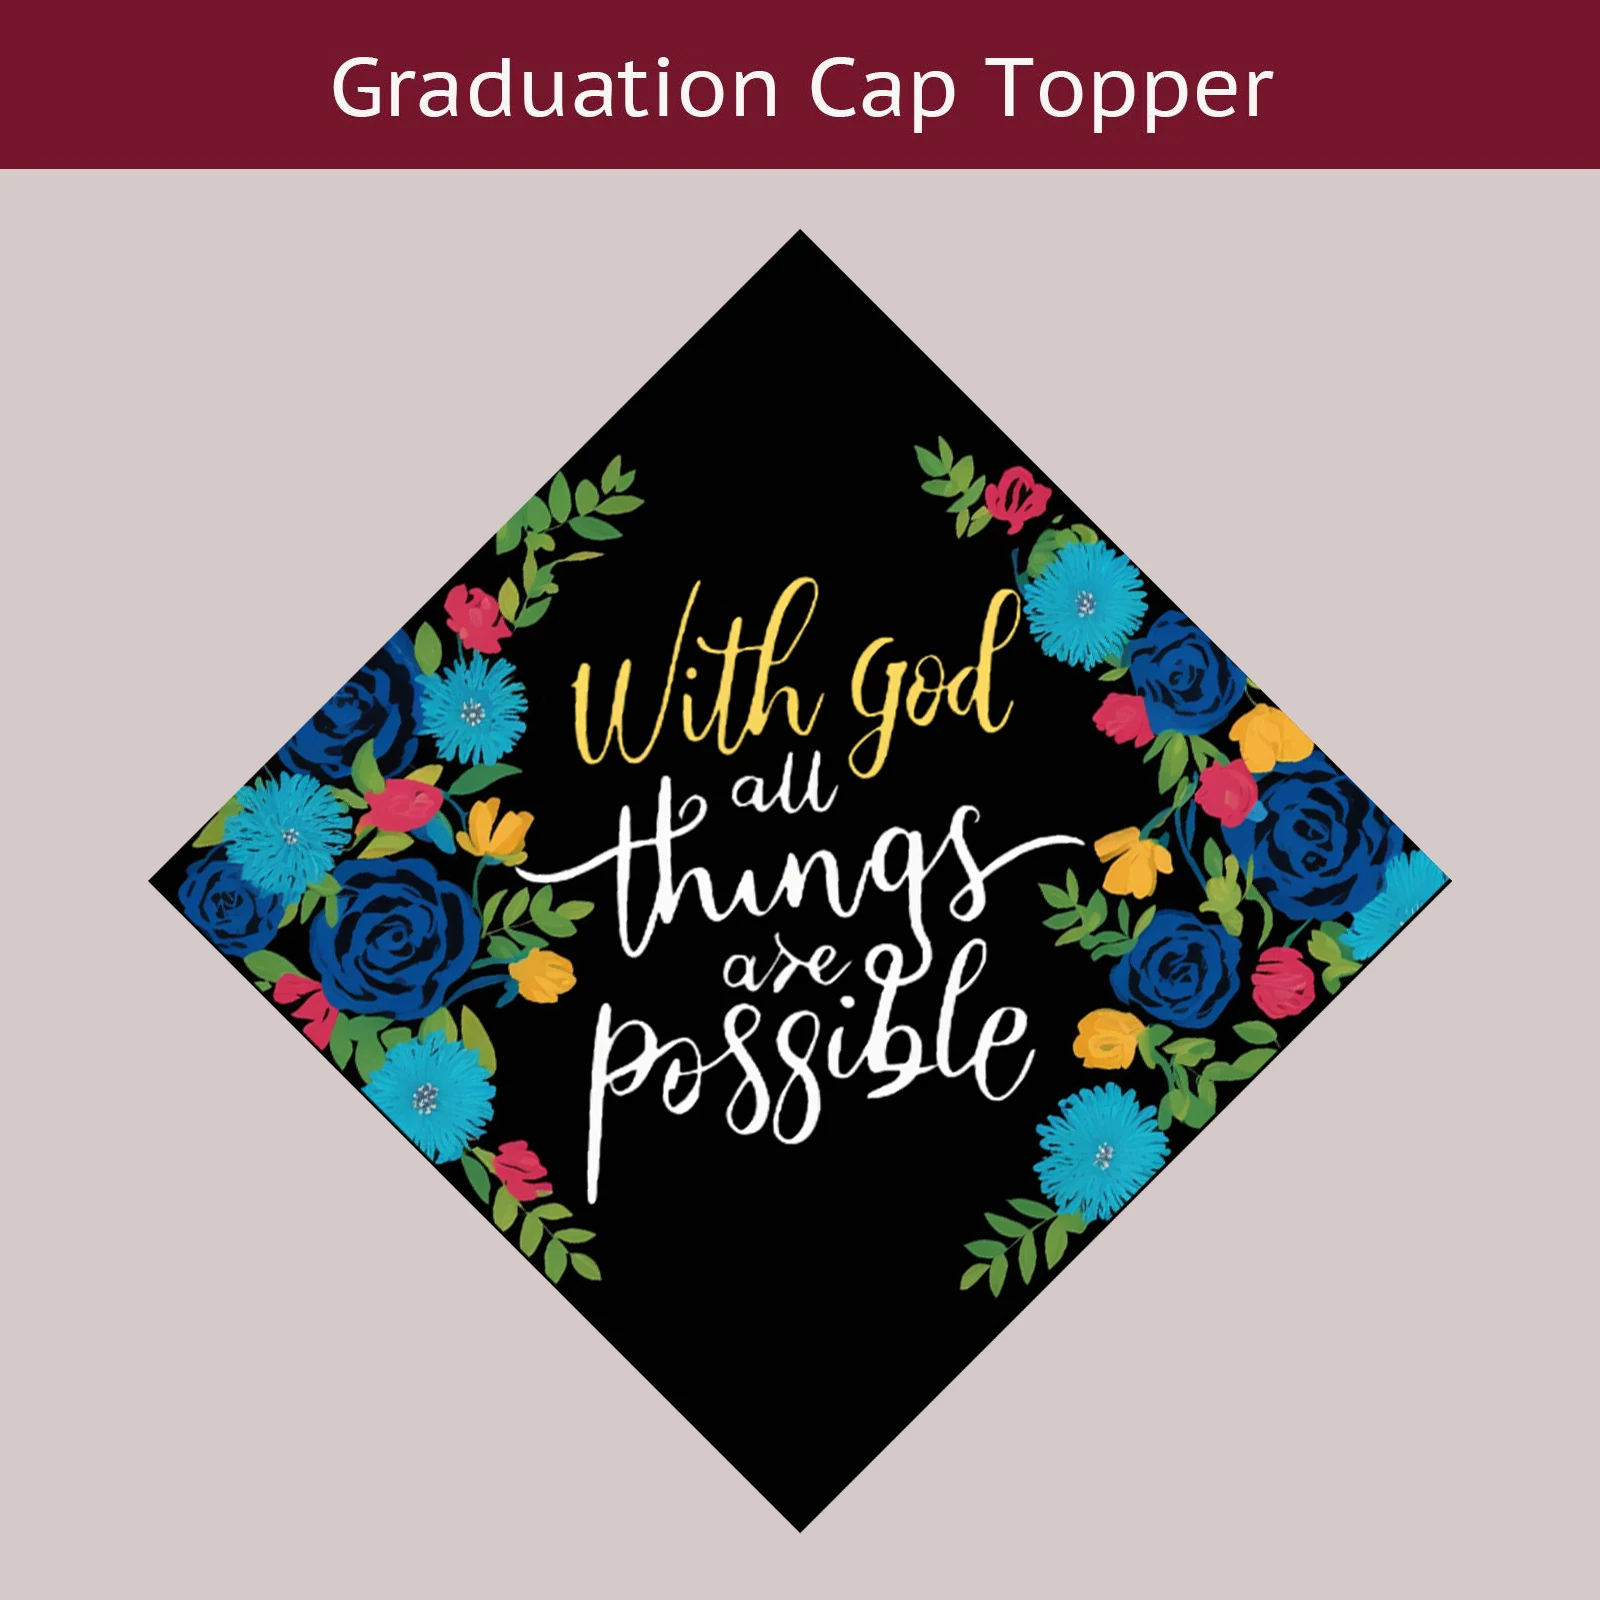 

Grad Cap Decorations Grad Caps Graduation Party Decorations Boho Floral With God,All Things Are Possible